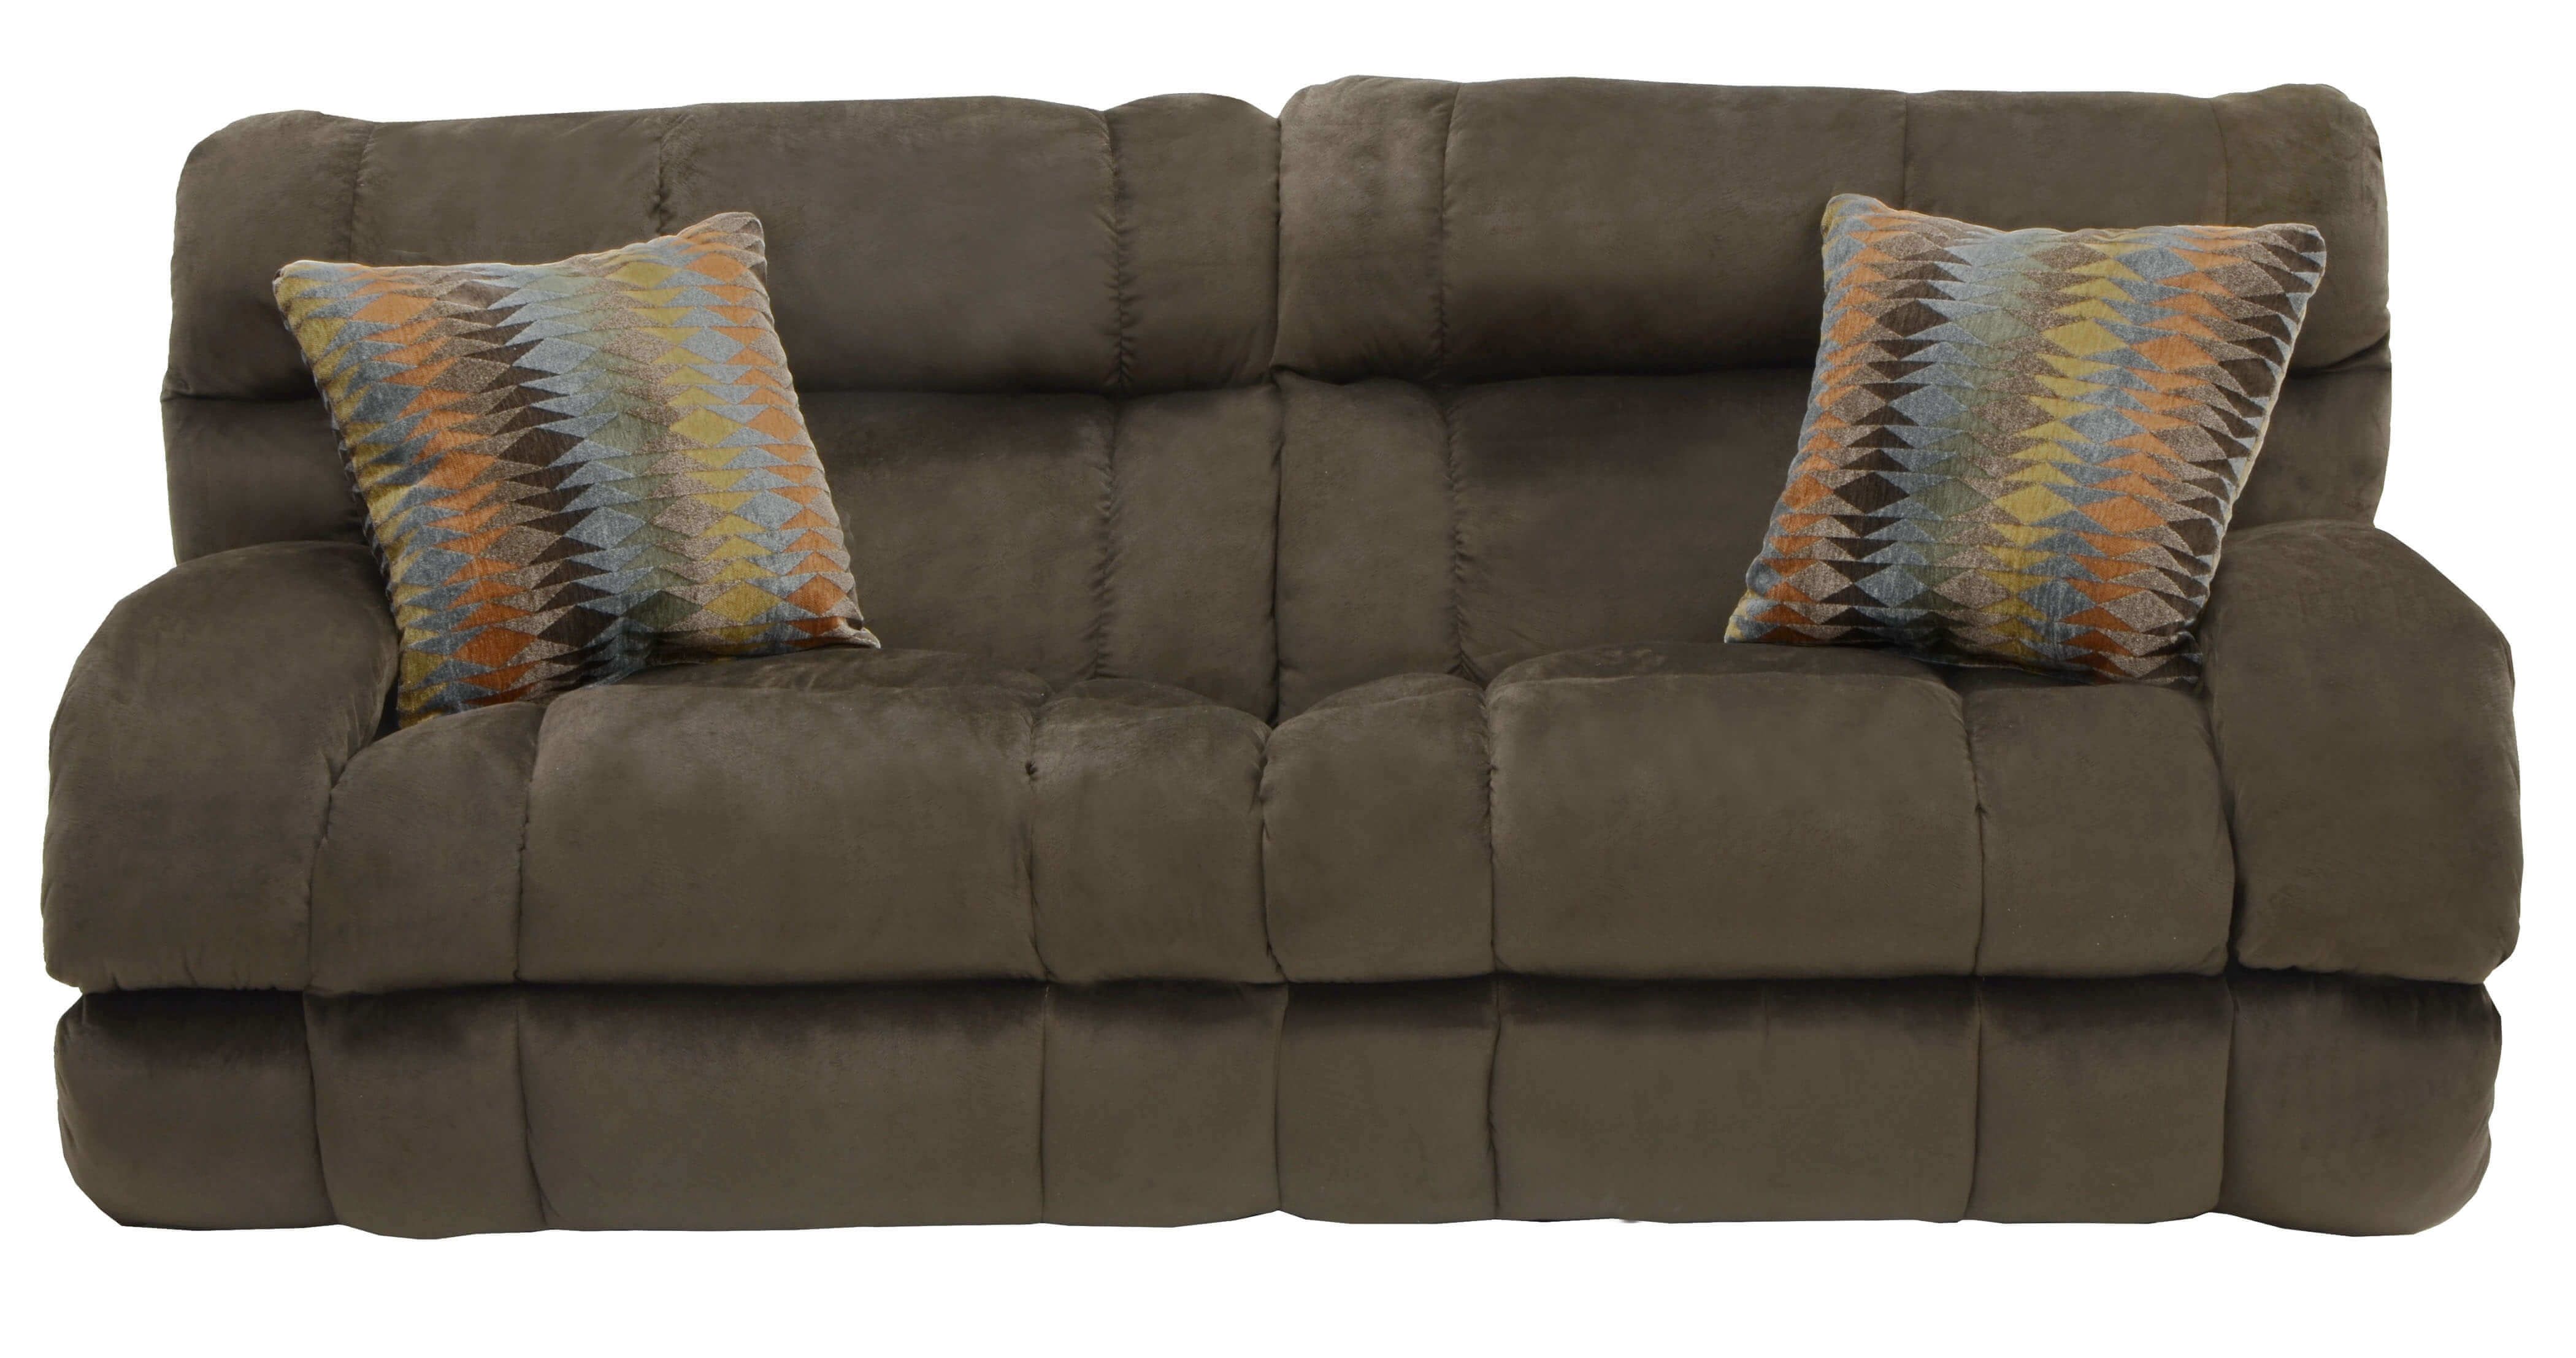 Catnapper Siesta Reclining Sofa | Delano's Furniture And Mattress Within Delano Smoke 3 Piece Sectionals (View 22 of 30)